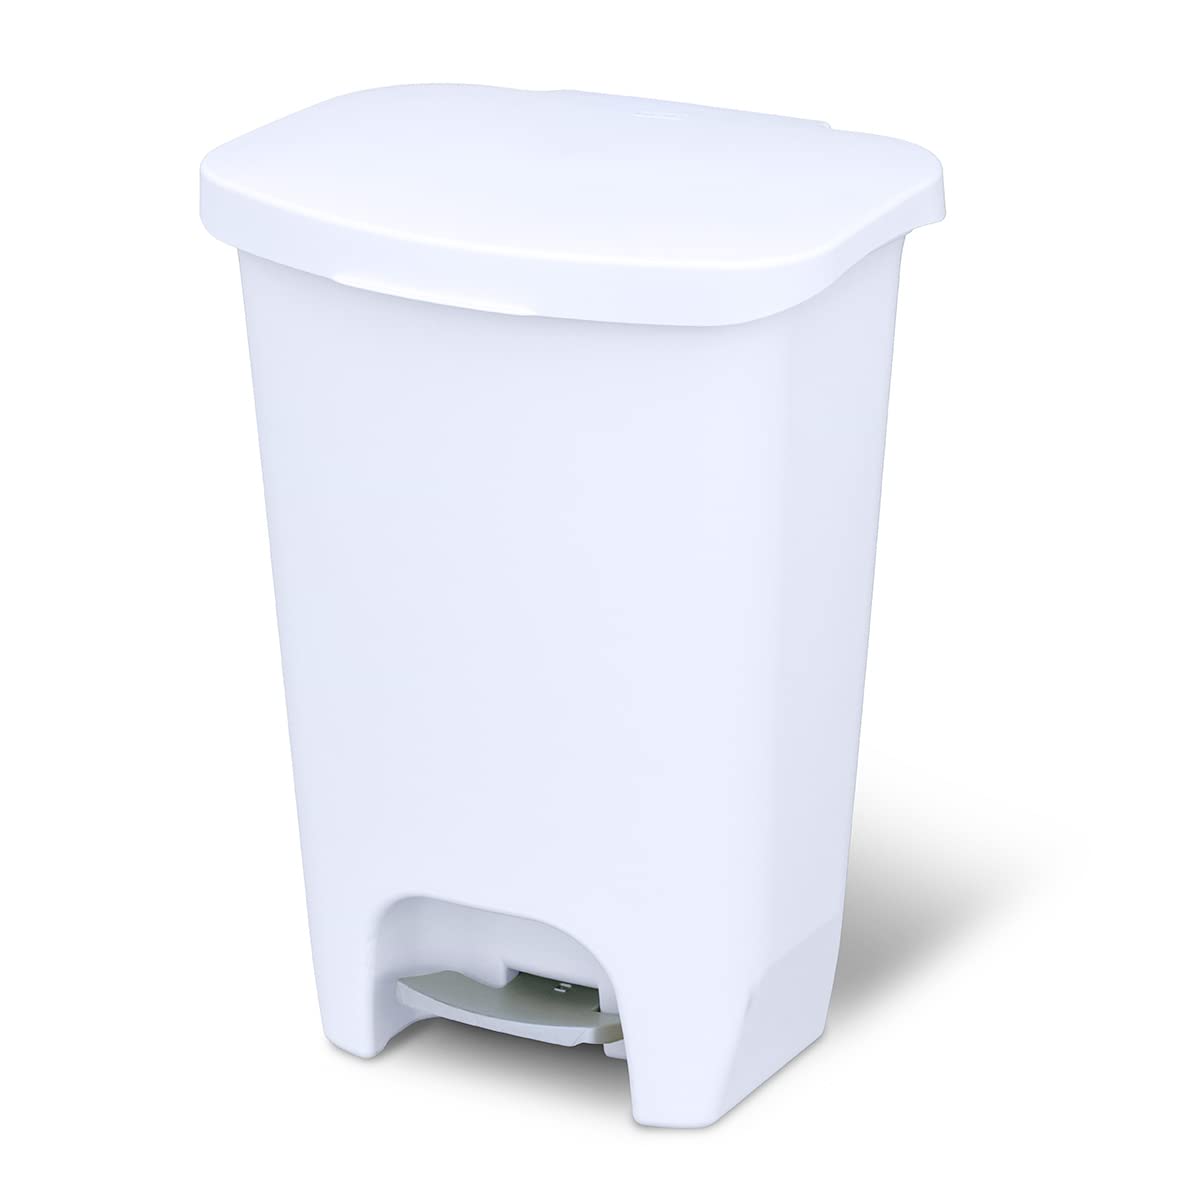 https://bigbigmart.com/wp-content/uploads/2023/10/Glad-13-Gallon-Trash-Can-Plastic-Kitchen-Waste-Bin-with-Odor-Protection-of-Lid-Hands-Free-with-Step-On-Foot-Pedal-and-Garbage-Bag-Rings-13-Gallon-White.jpg